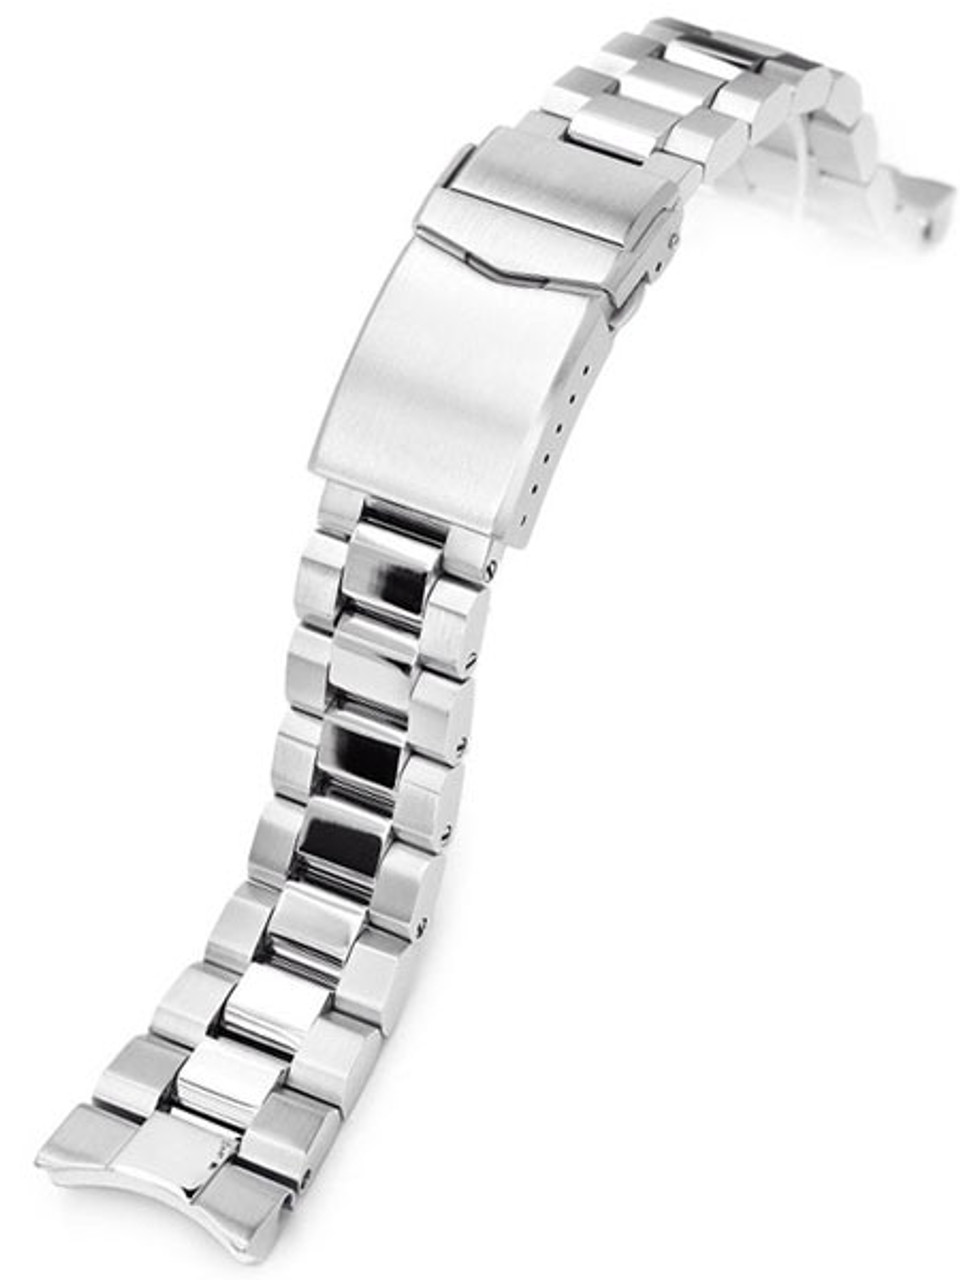 Strapcode Stainless Steel Hexad Oyster Bracelet for SRPB51, SRPB09 and  SRPB53, SRPB99, SRPB49 #SS221820BPS066 (22mm)